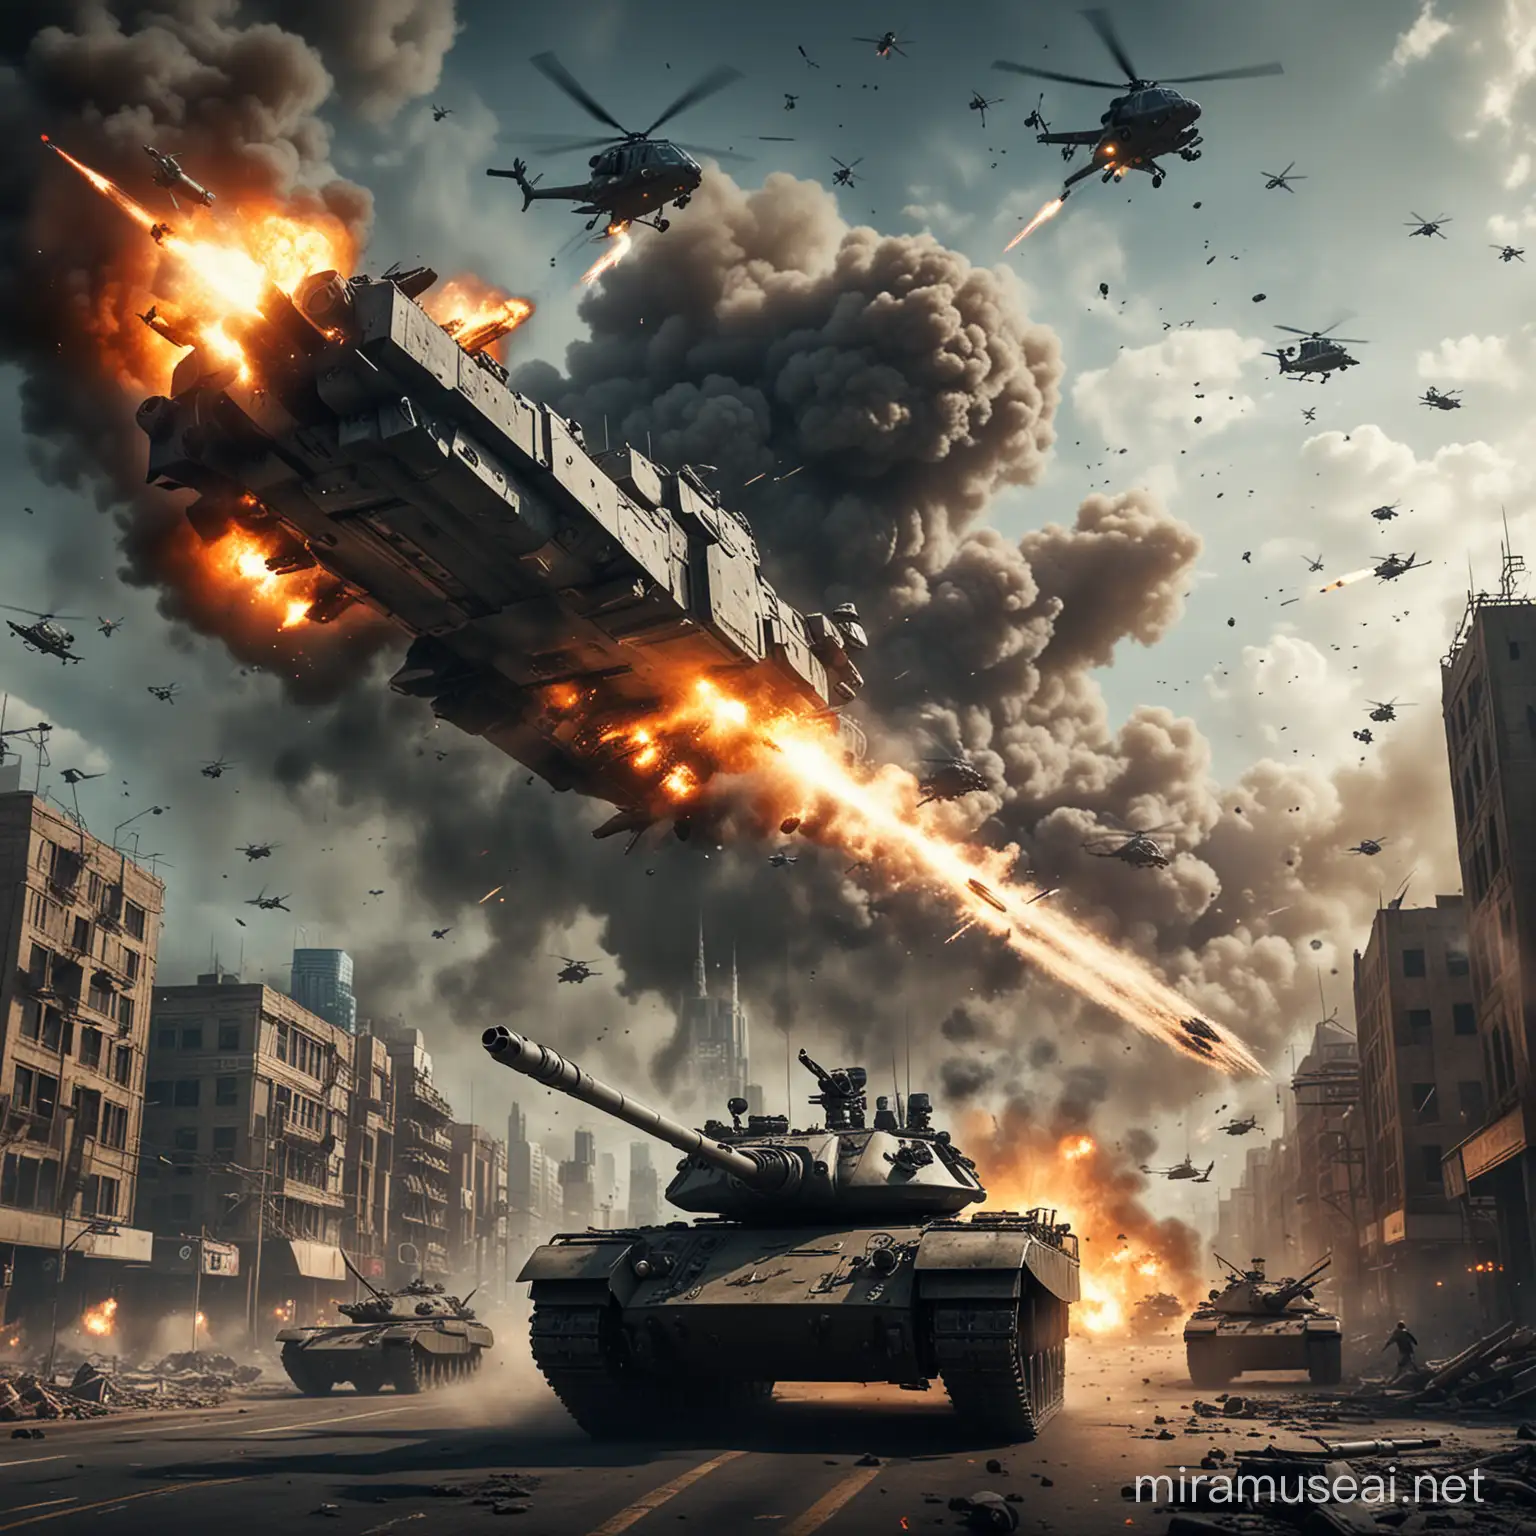 Imagine a movie poster based on portraying a urban battlefield with missiles and futuristic helicopters flying through the air. Futuristic tanks and an enemy helicopter are on fire and spewing dark smoke 